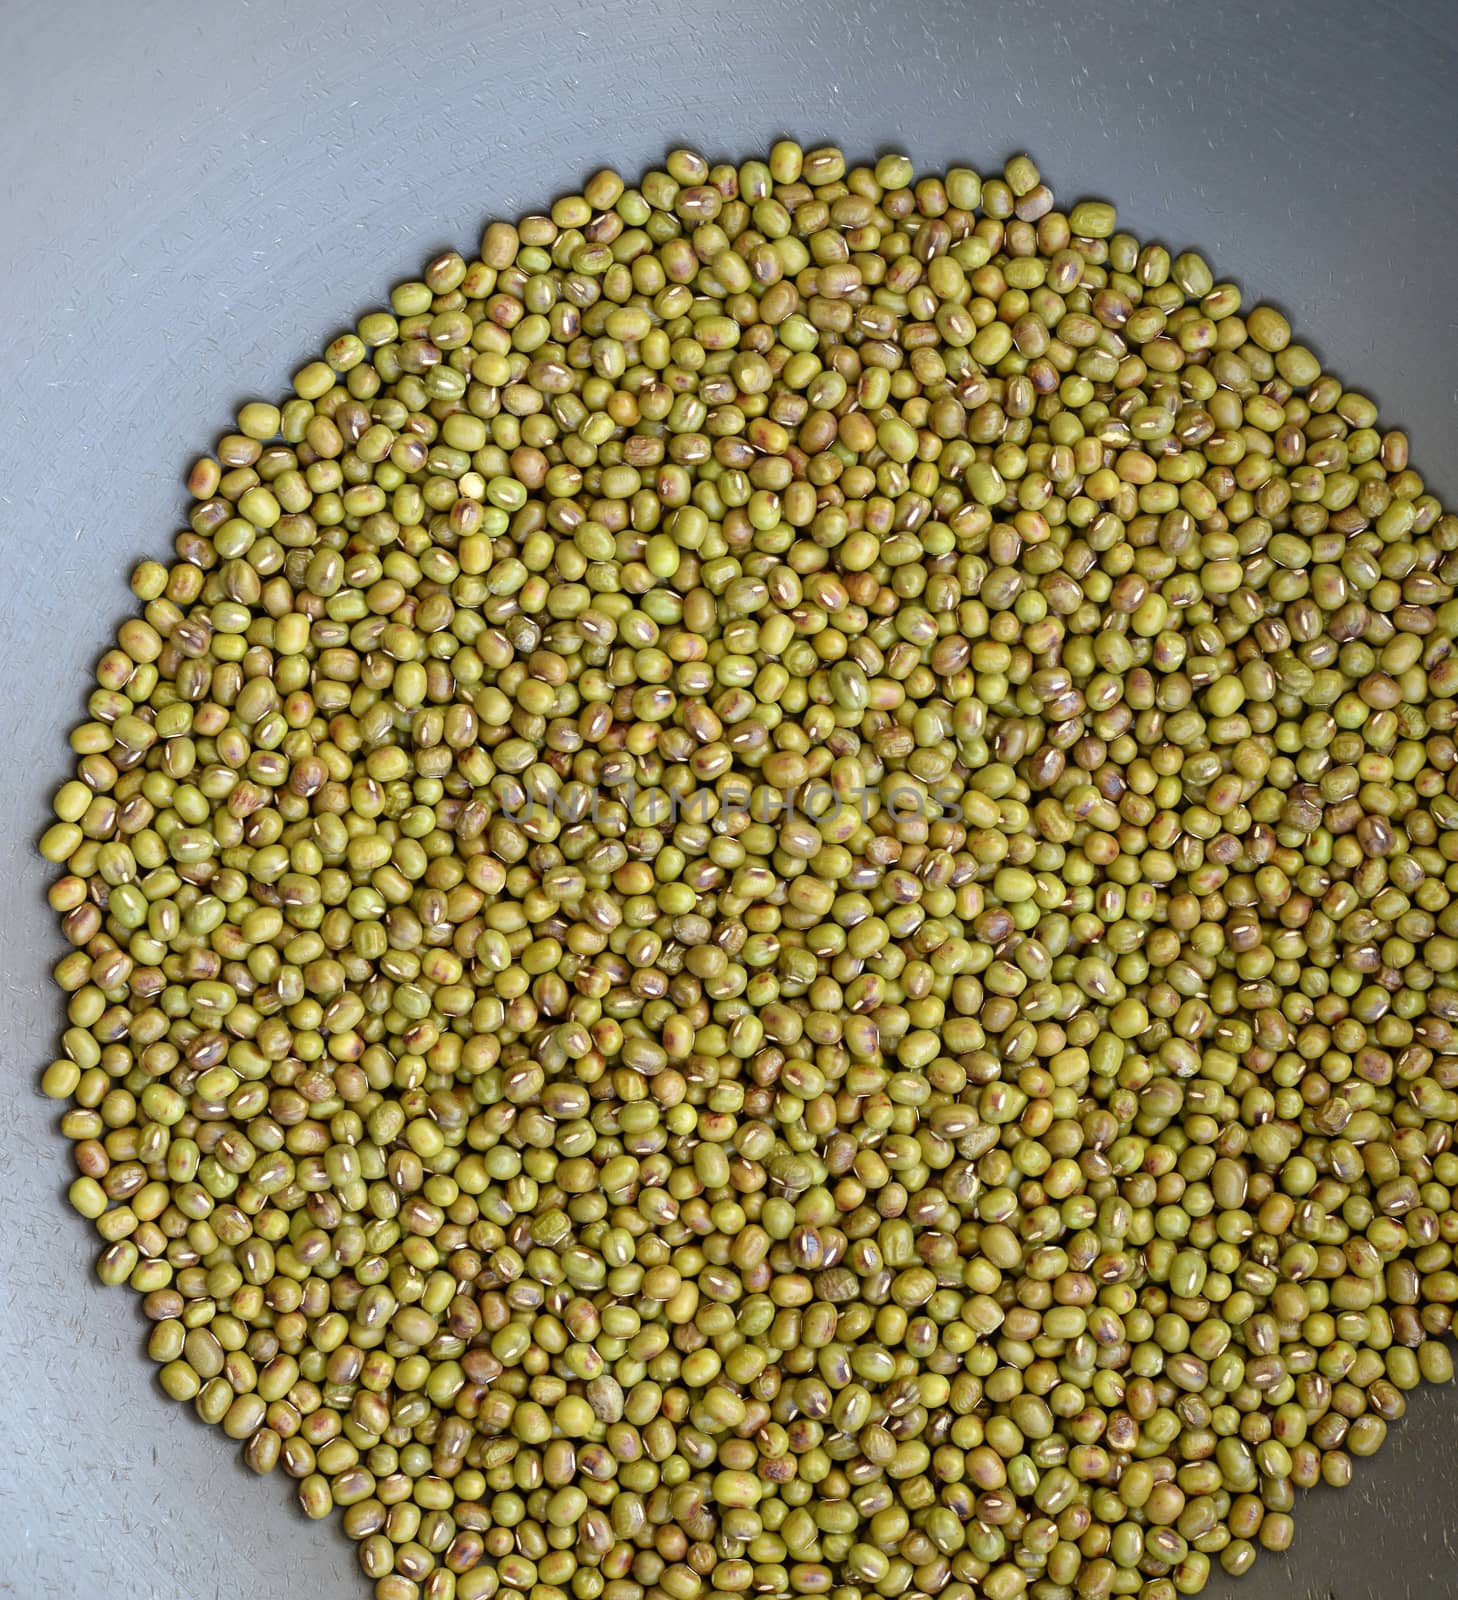 A close-up of many mung beans on a silver metal background. by hellogiant